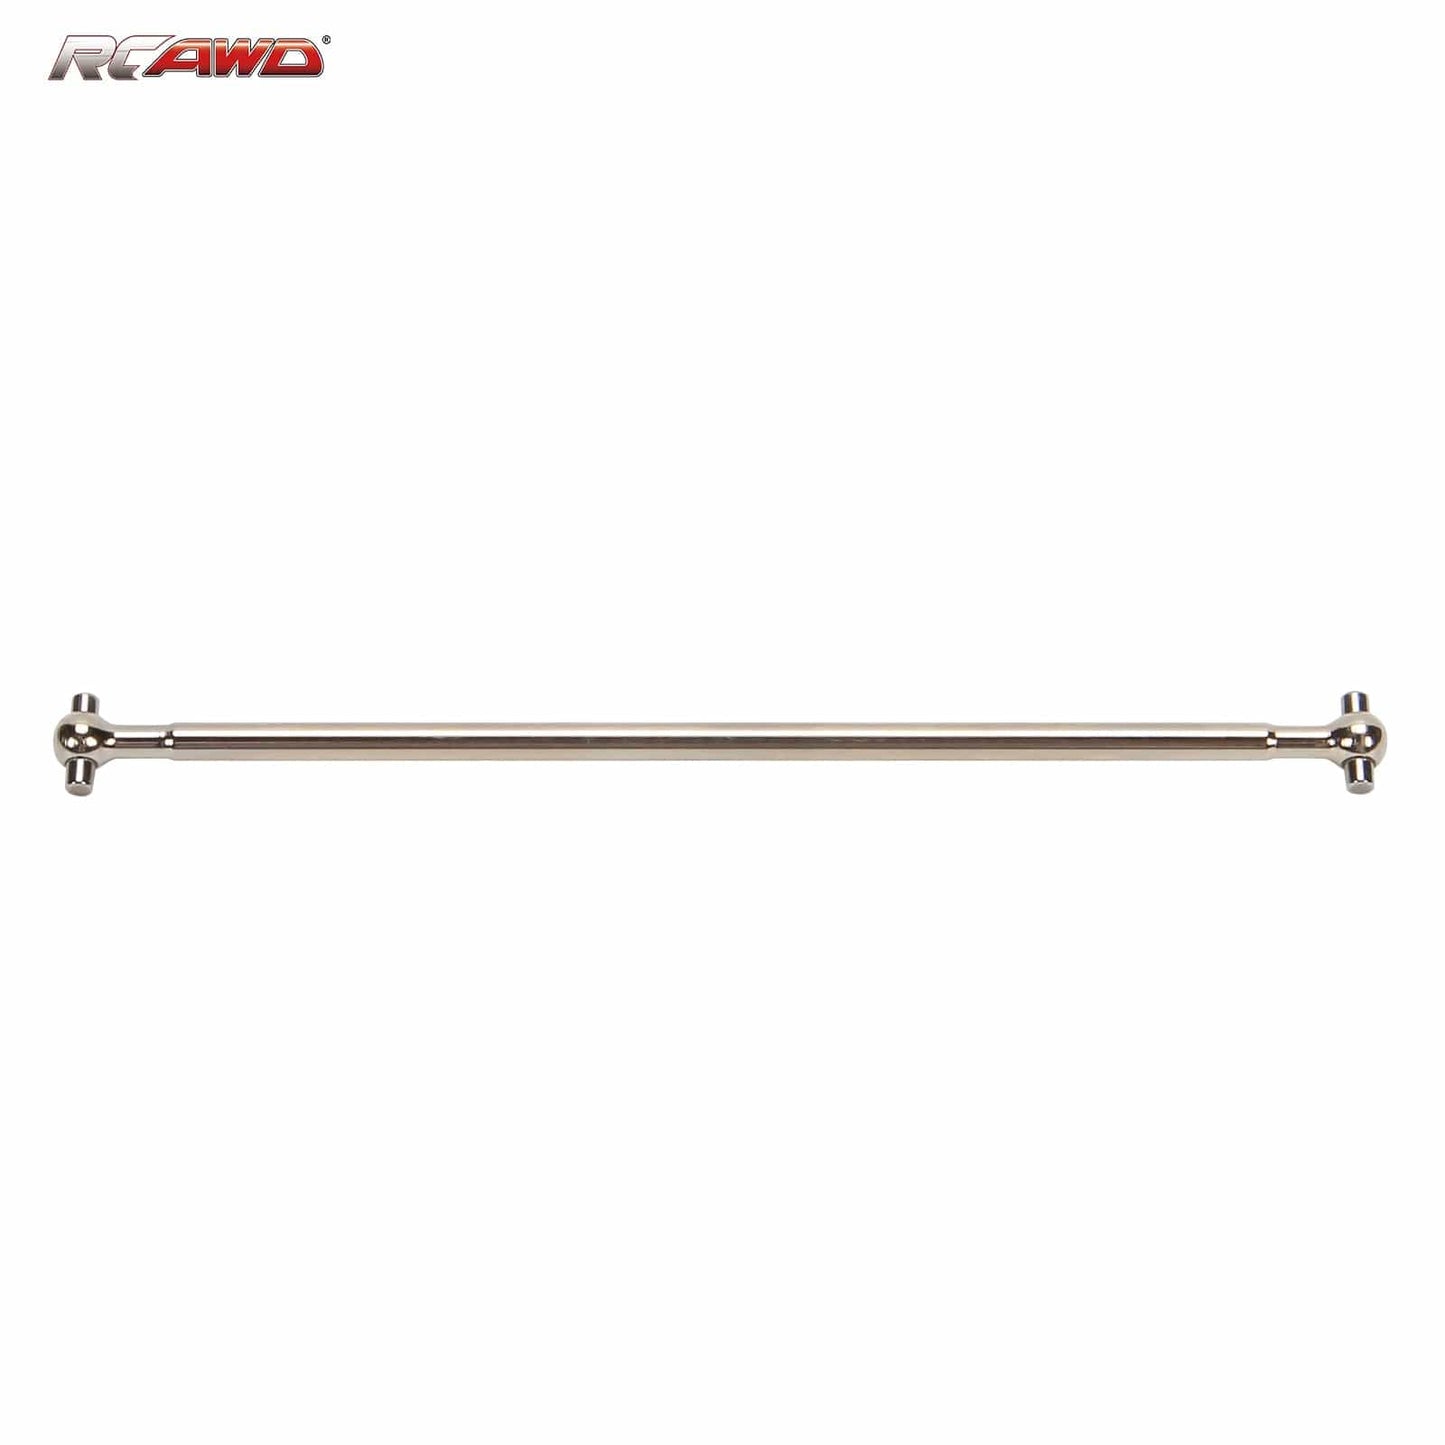 RCAWD Silver #45 steel Front Center Drive Shaft dogbone 4*136MM  for 1-10 Losi Baja Rey RC car Upgrded part